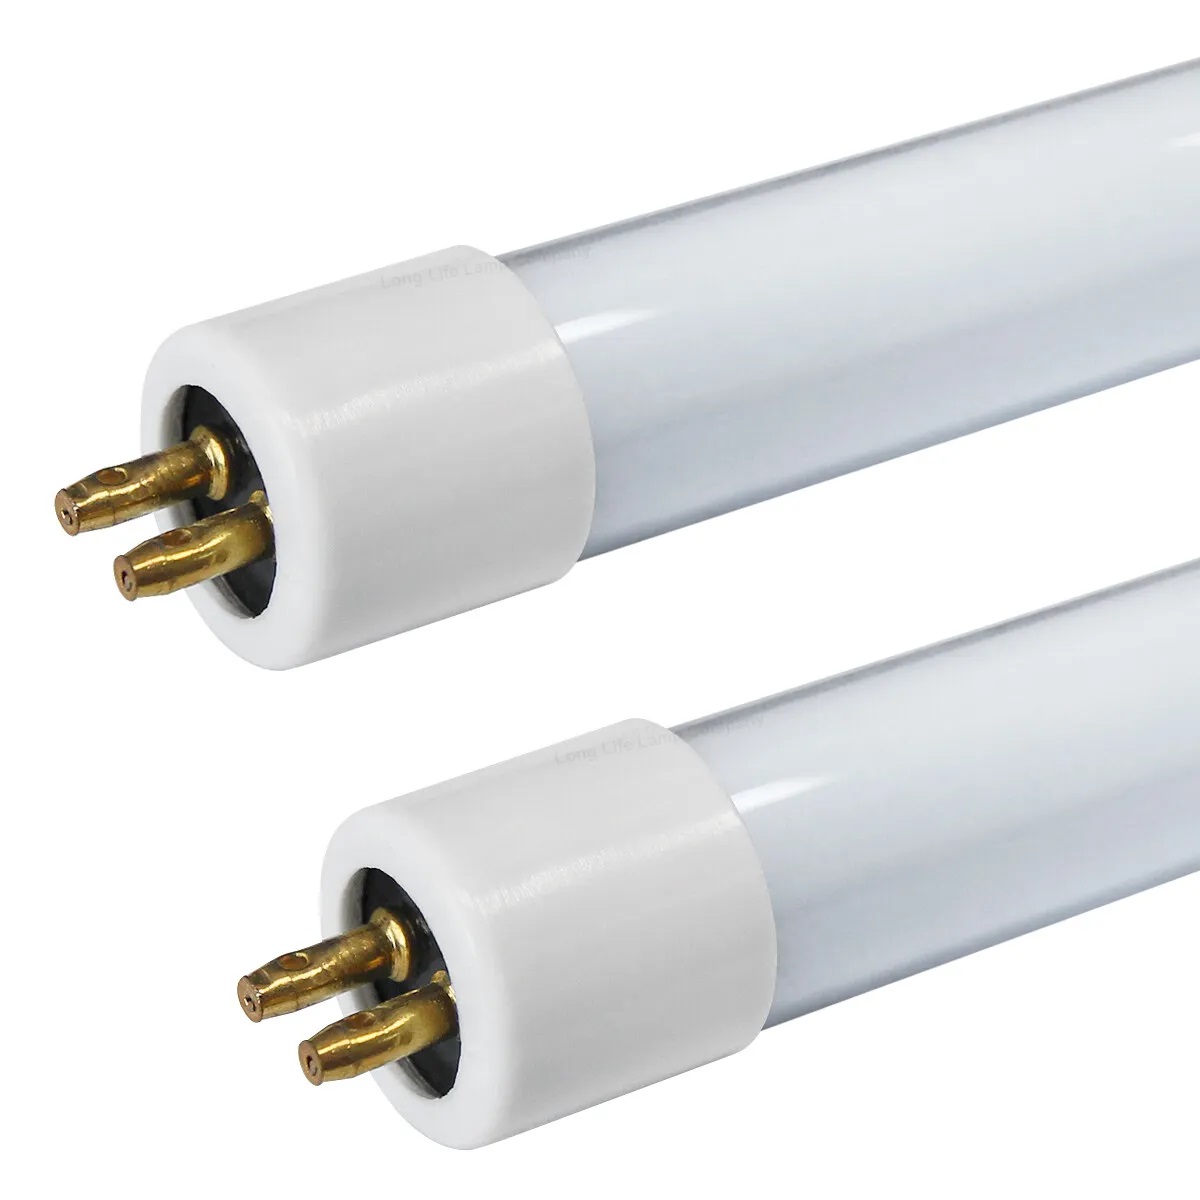 What Lengths Do Fluorescent Tubes Come In